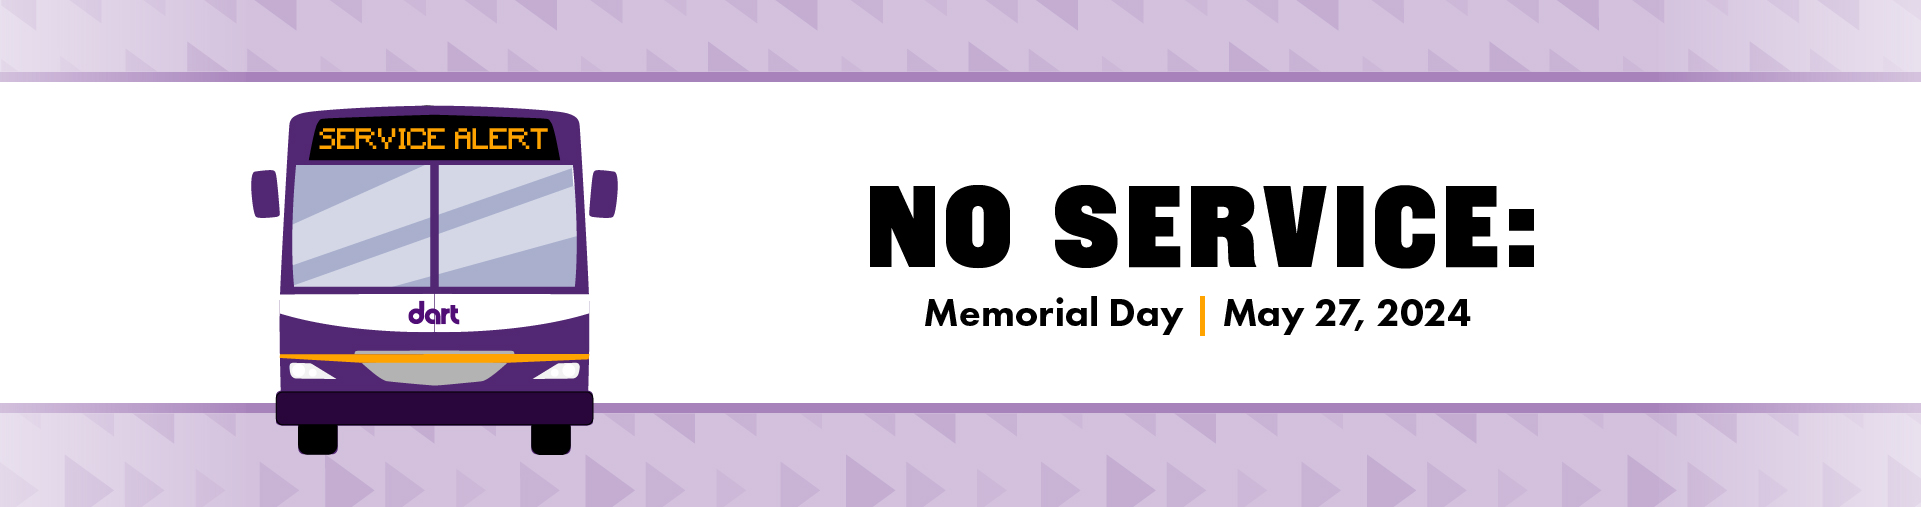 No service on Memorial Day 2024